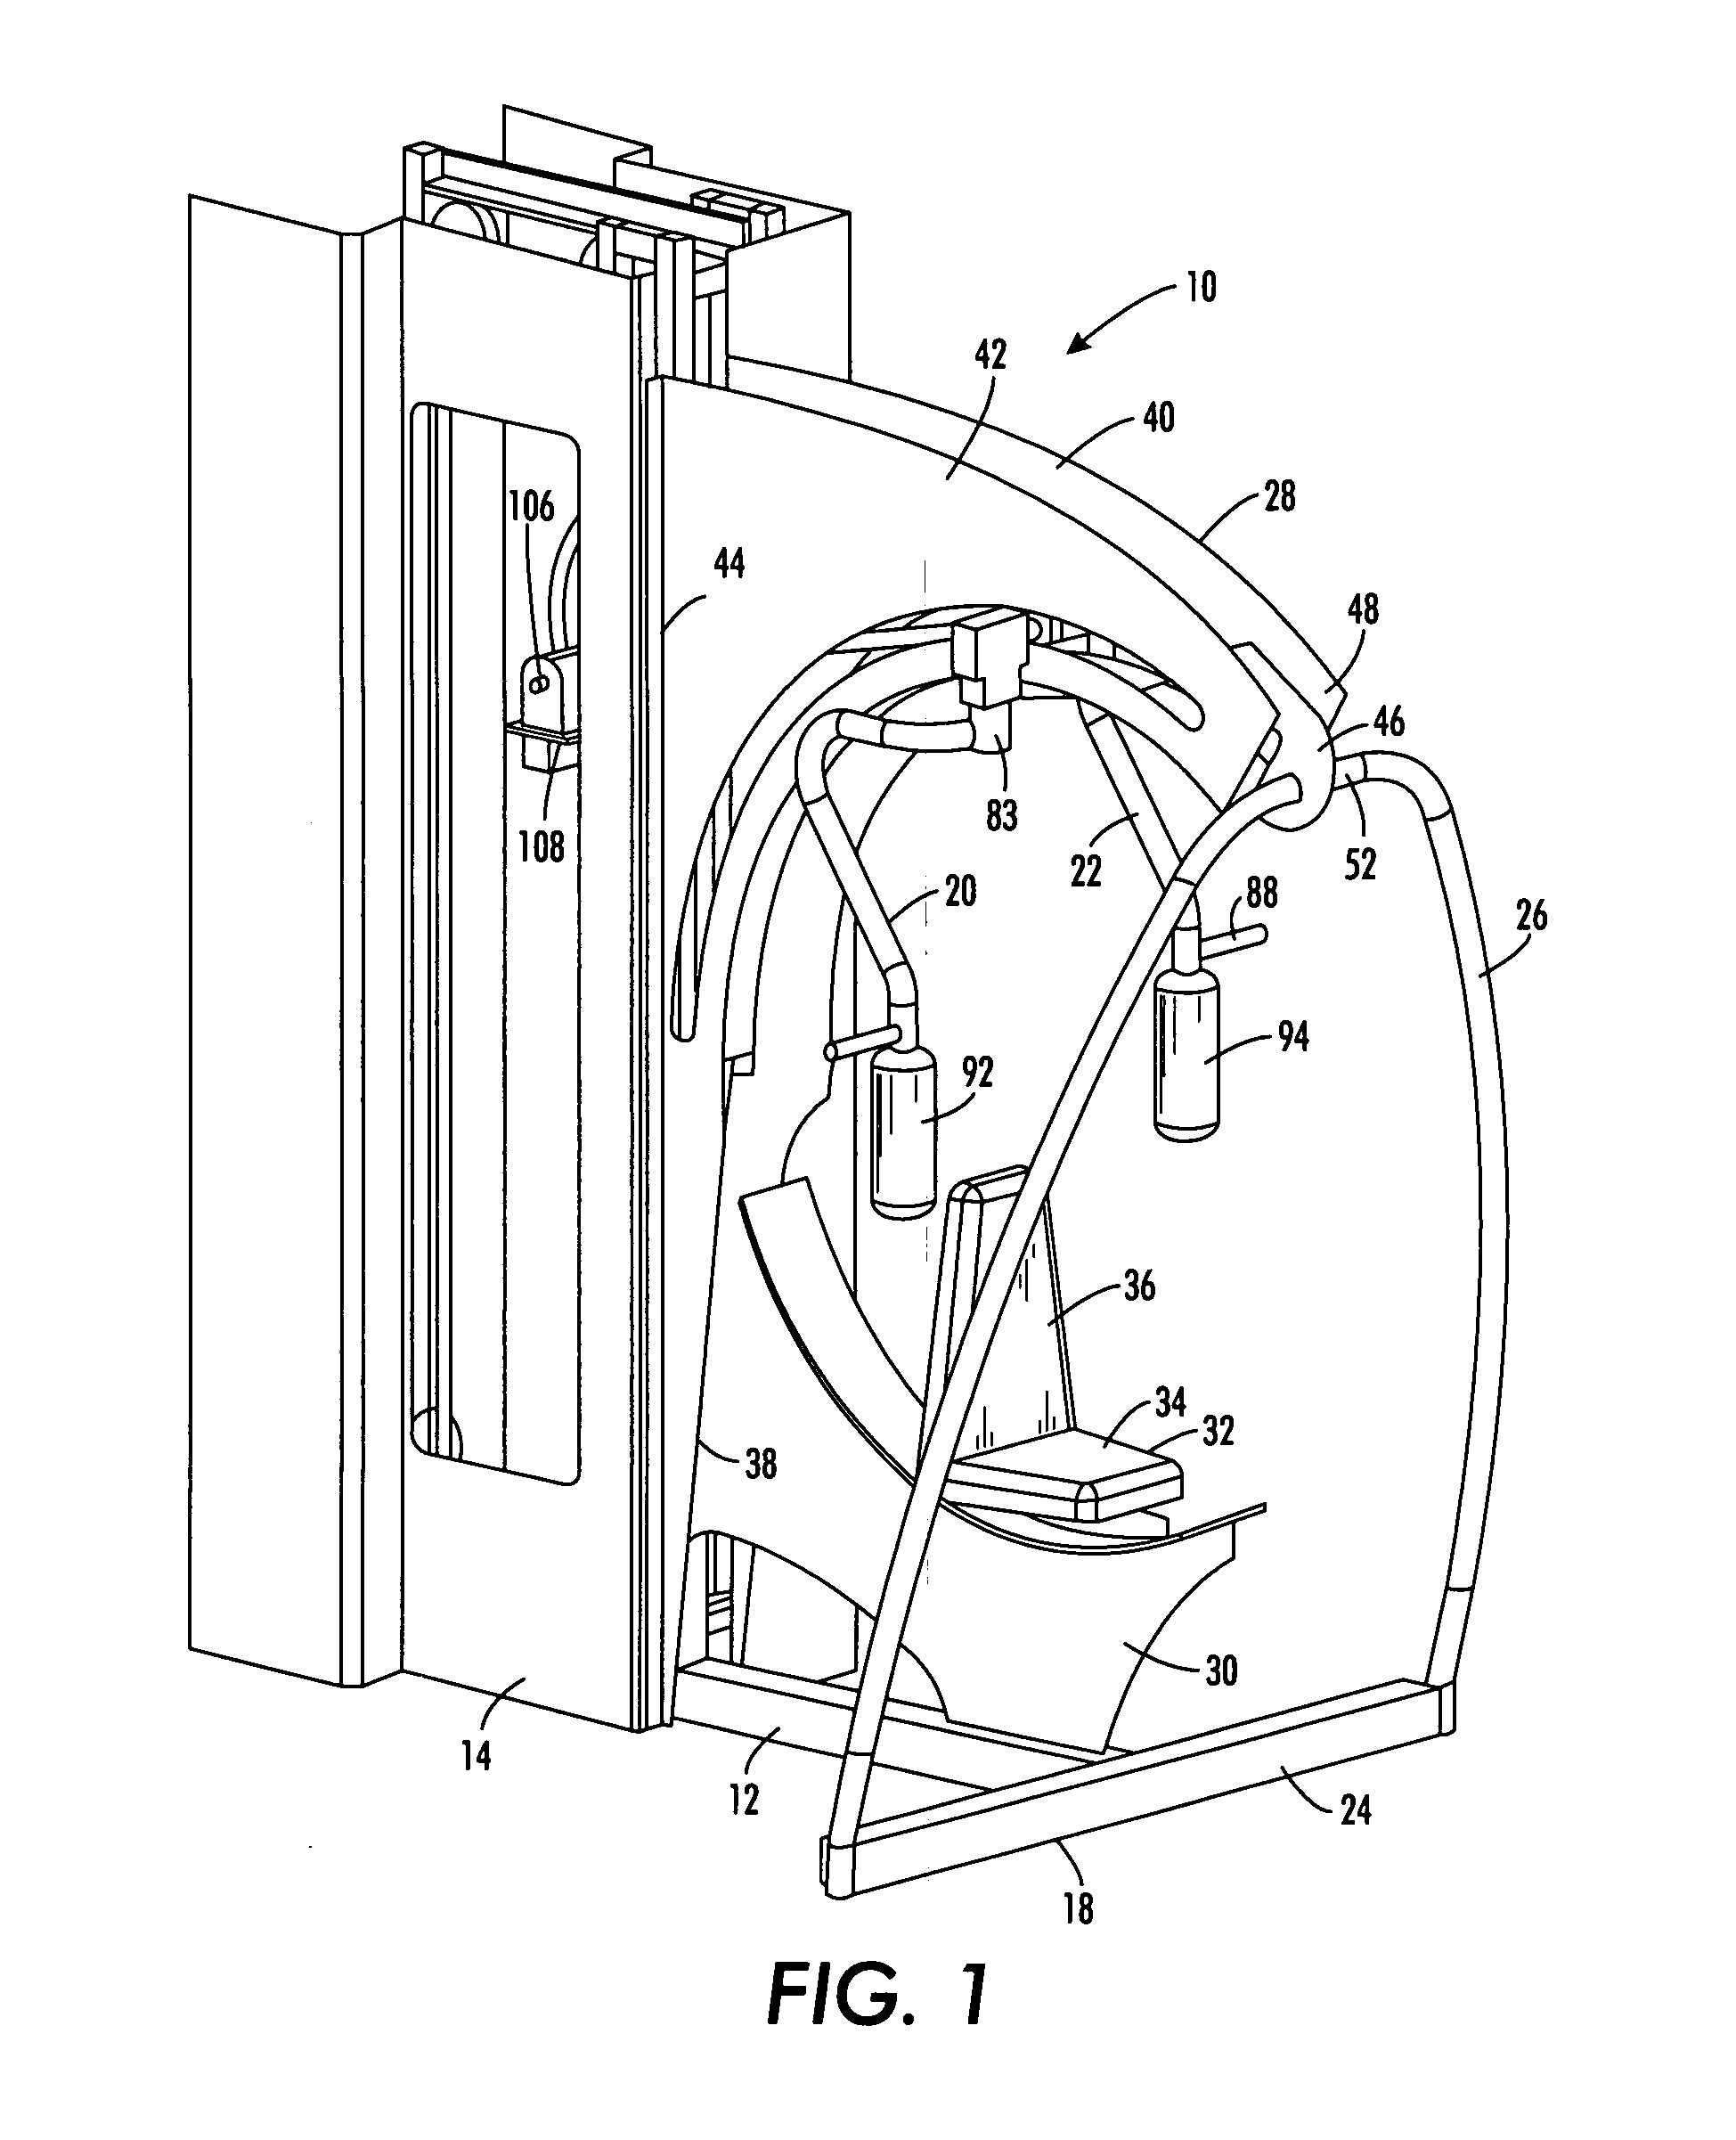 Multi-axis resistance exercise device